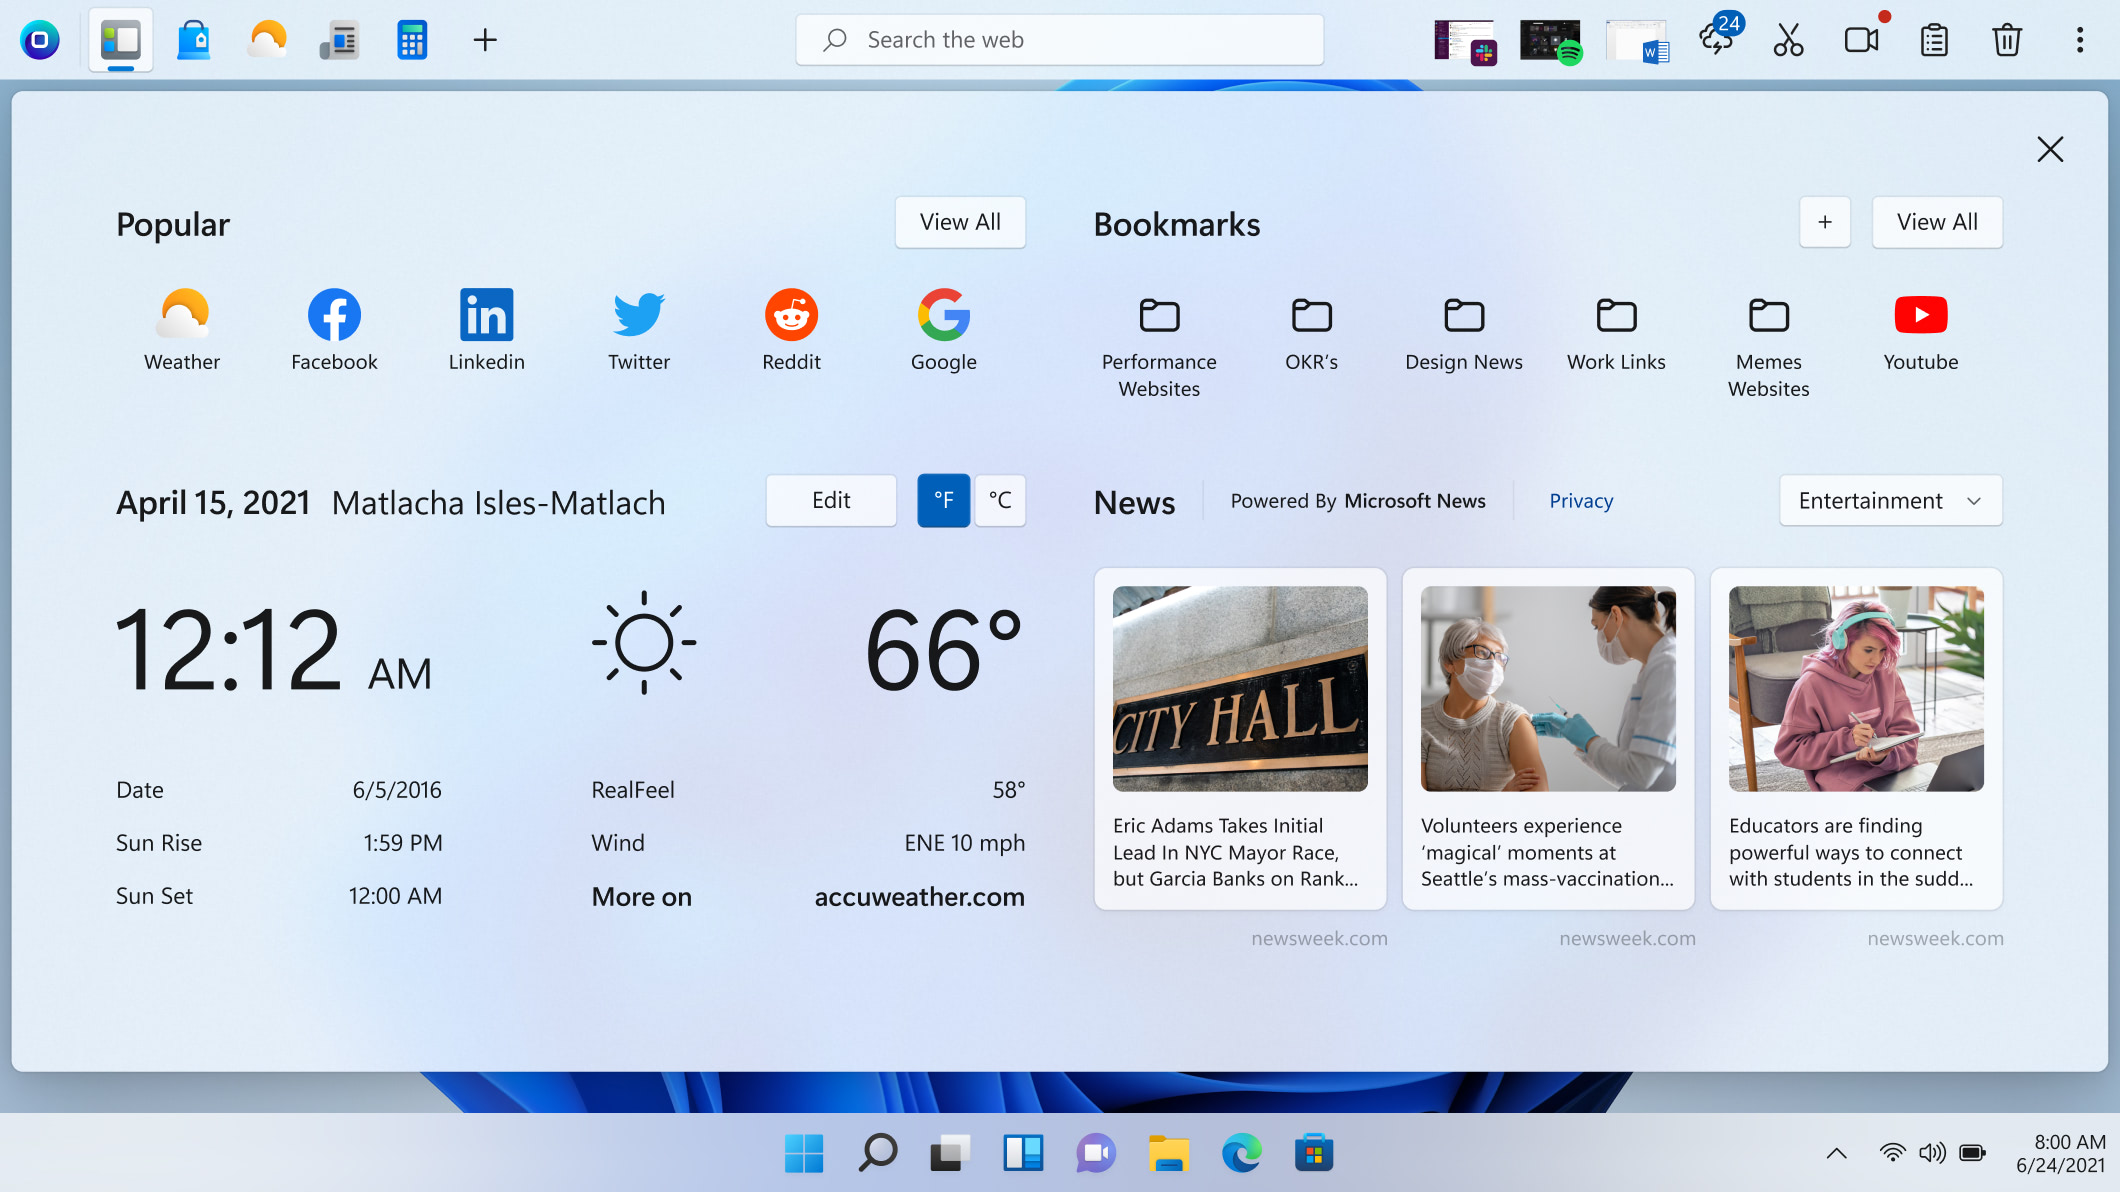 Meet your new dashboard: A sleek panel that opens with one click from your OneLaunch dock. It plays host to your most-used (and most important) information you’ll need today.